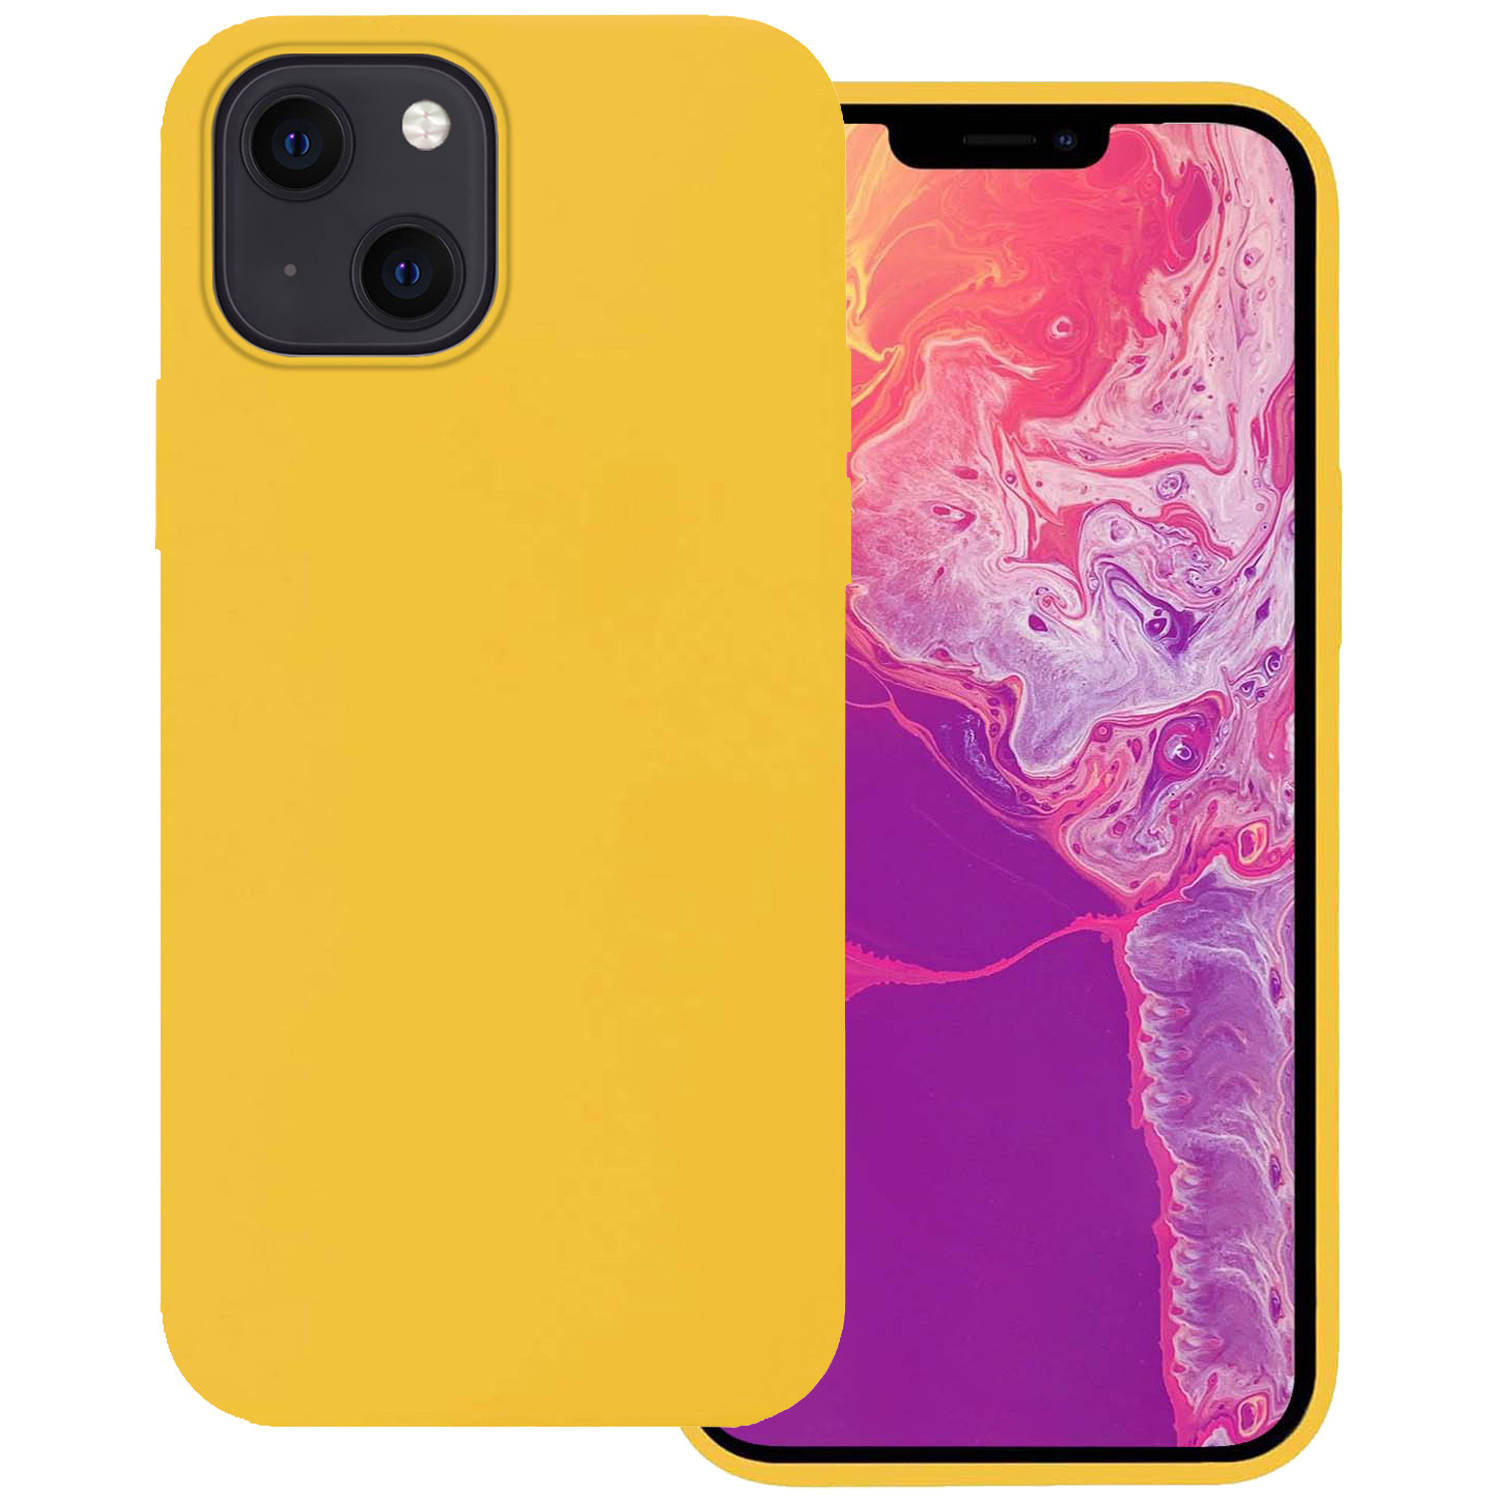 Basey Iphone 13 Hoesje Silicone Case Iphone 13 Case Geel Siliconen Hoes Iphone 13 Hoes Cover Geel